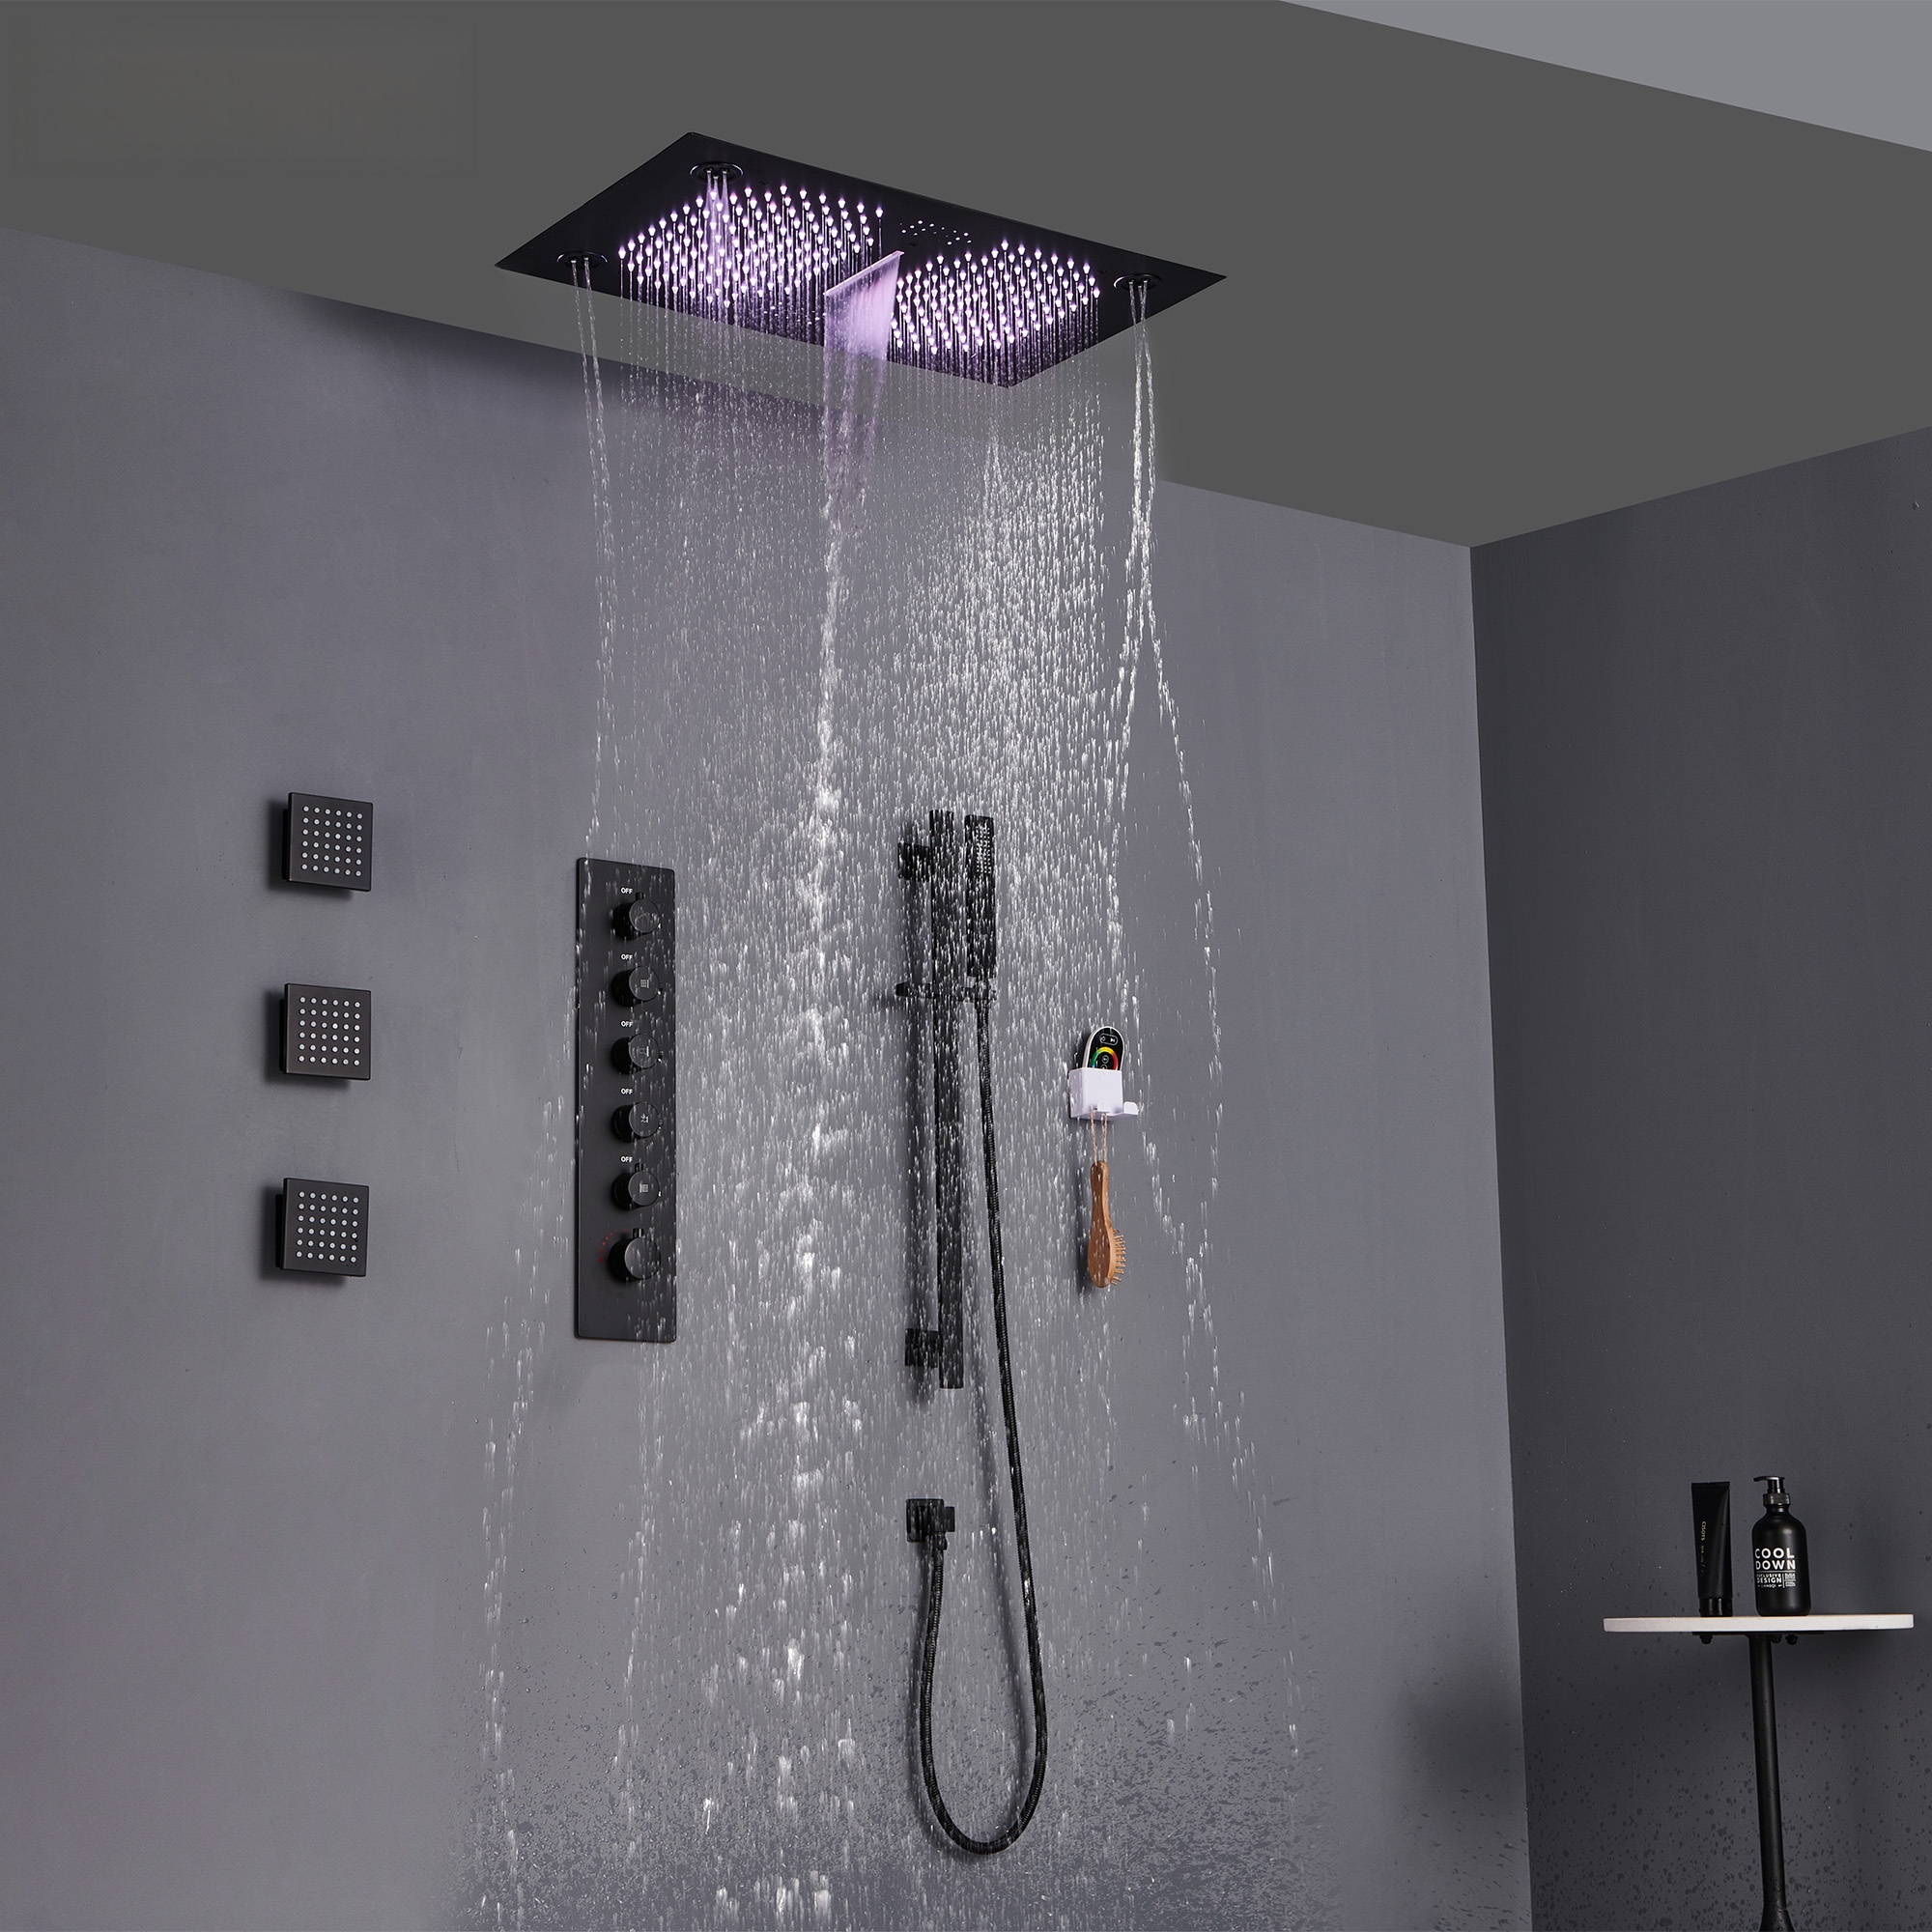 5 Functions Flush-Mounted Luxury LED and Music Thermostatic Complete Shower System with Body Jets and Slide Bar (Rough-in Valve Included)